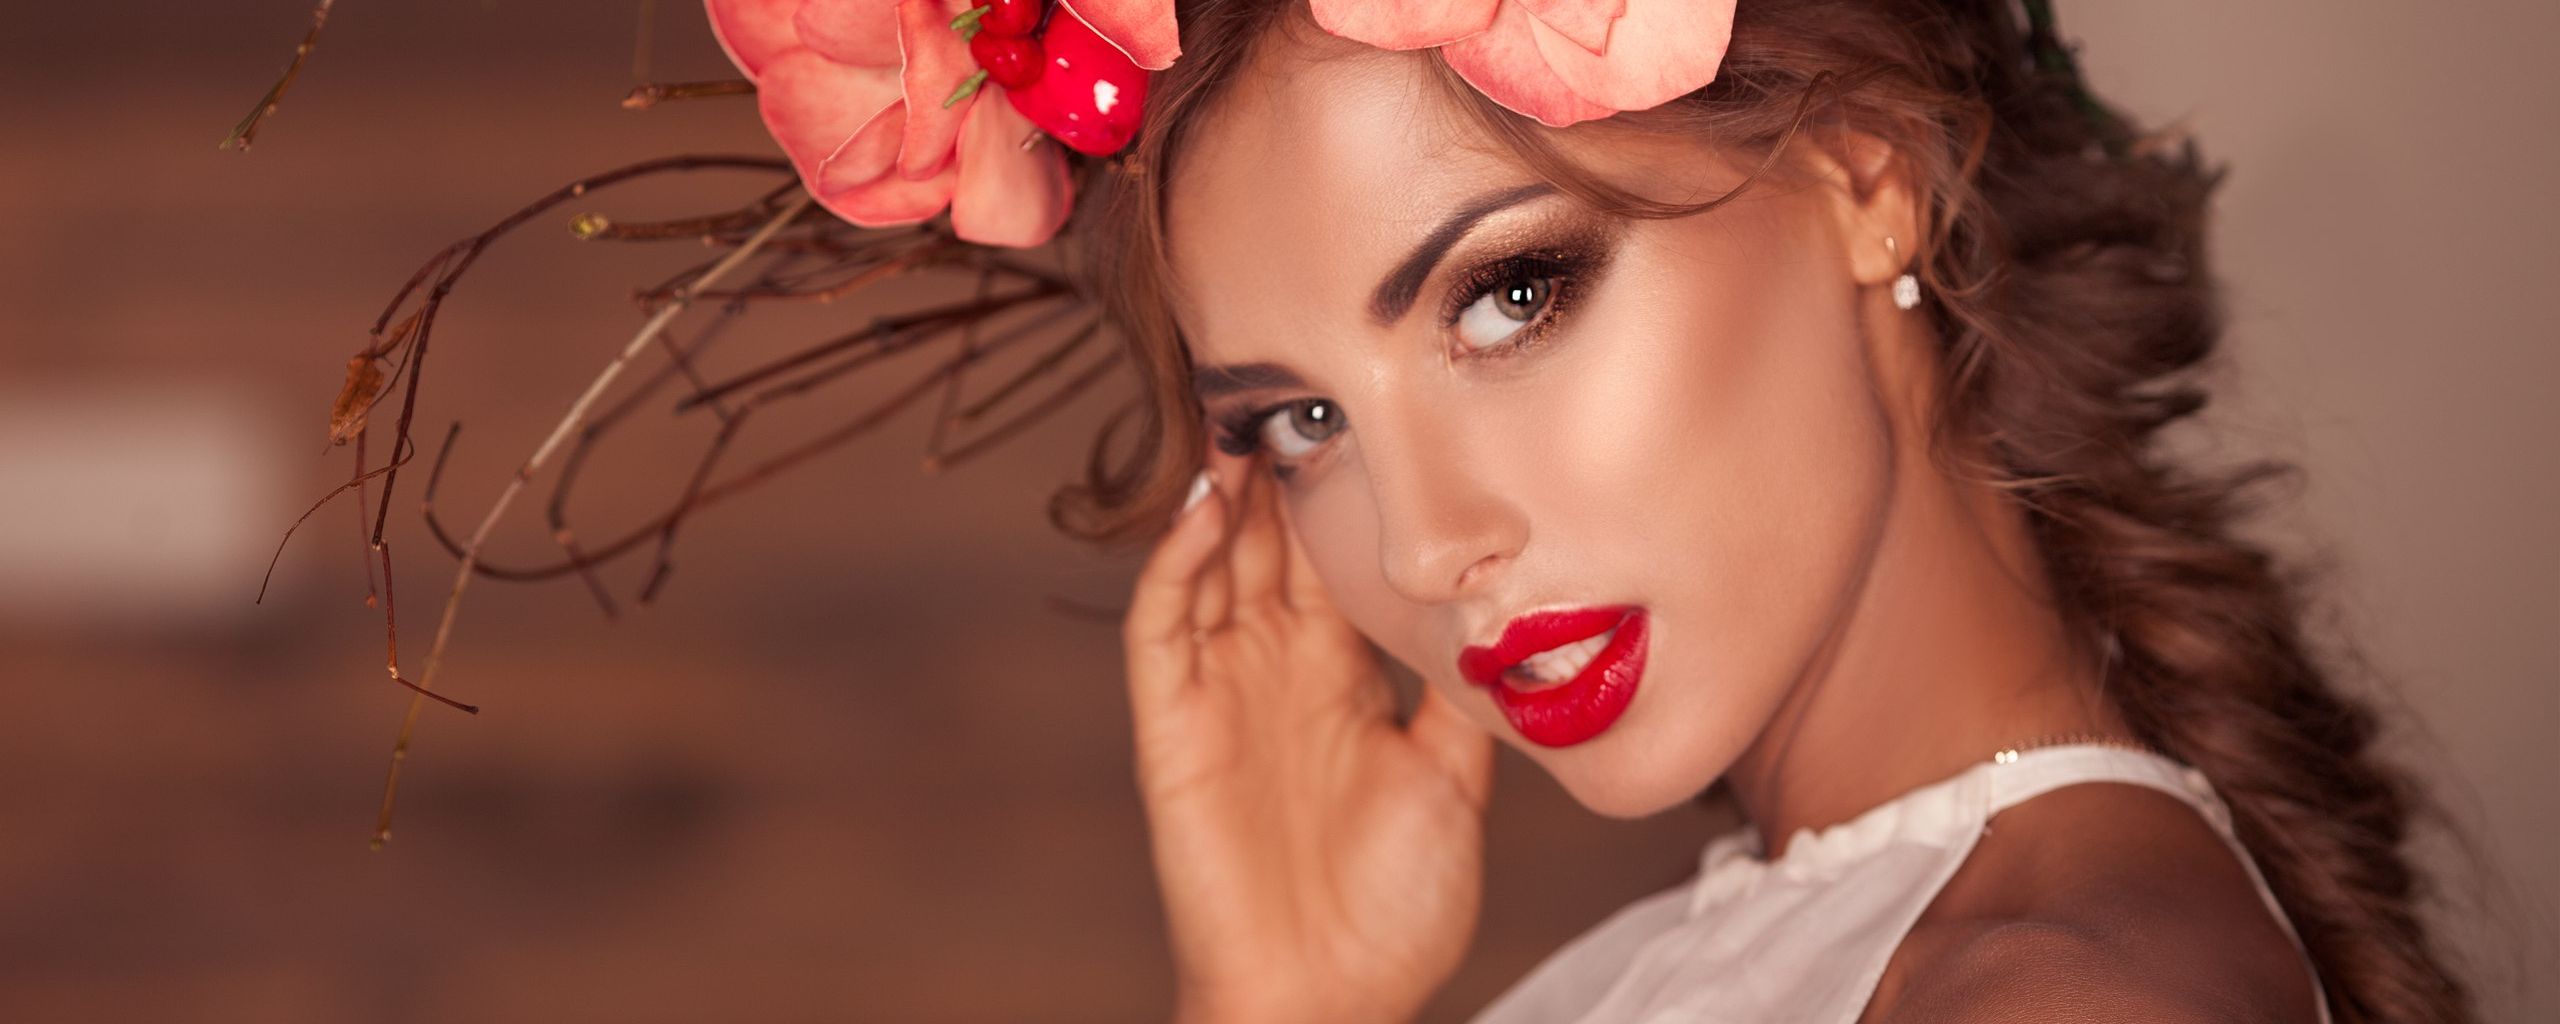 Desktop Wallpaper Blonde, Red Lips, Girl, Flowers Crown, HD Image, Picture, Background, Czesby